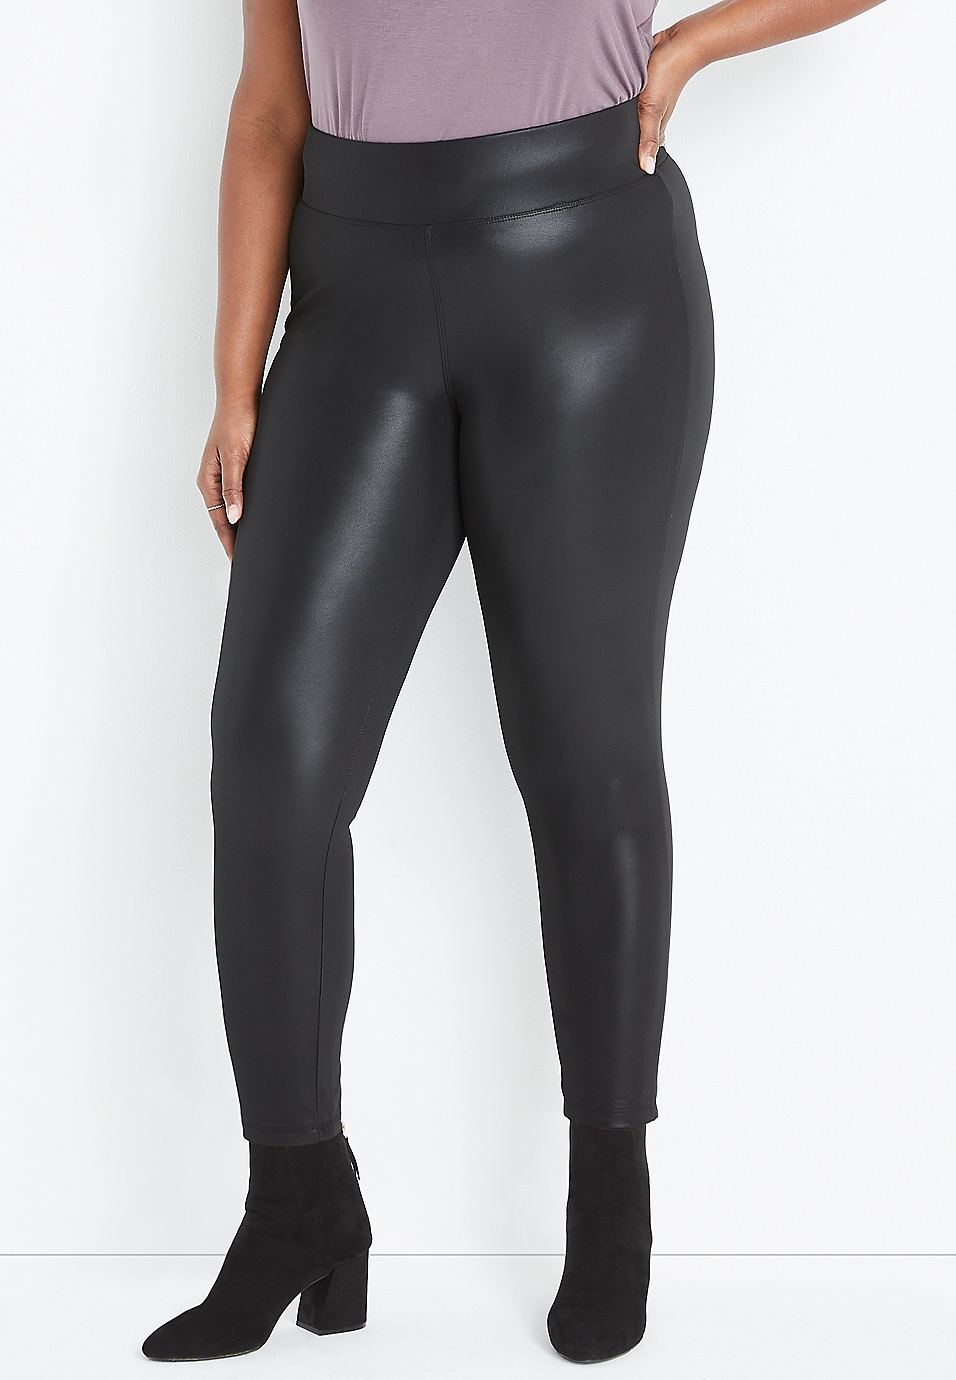 Udtale Lydighed smag Plus Size ONE5ONE™ Black Faux Leather 4-Way Stretch Legging | maurices